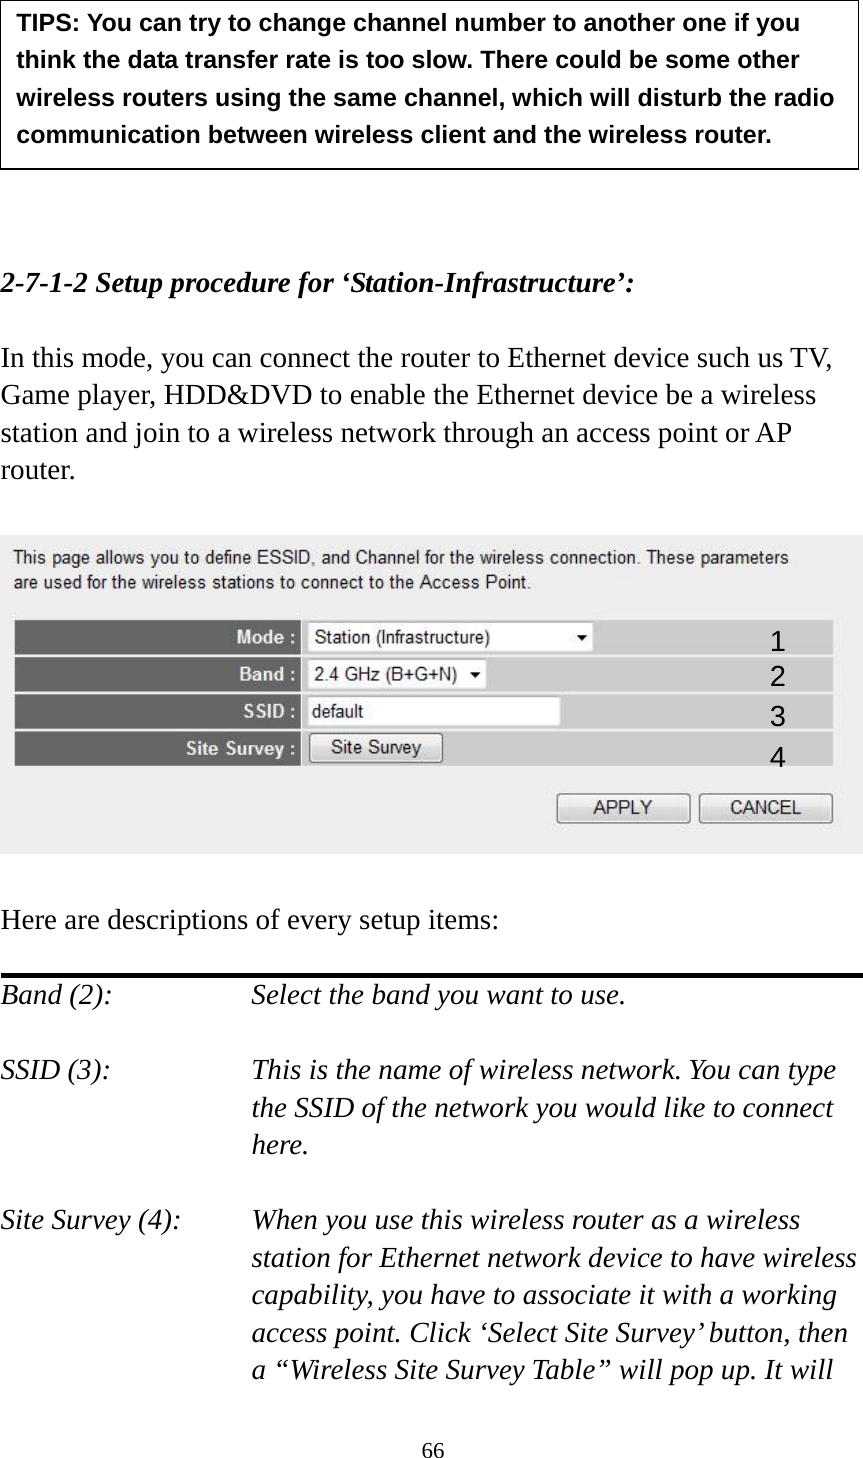 66         2-7-1-2 Setup procedure for ‘Station-Infrastructure’:  In this mode, you can connect the router to Ethernet device such us TV, Game player, HDD&amp;DVD to enable the Ethernet device be a wireless station and join to a wireless network through an access point or AP router.    Here are descriptions of every setup items:  Band (2):  Select the band you want to use.  SSID (3):  This is the name of wireless network. You can type the SSID of the network you would like to connect here.  Site Survey (4):  When you use this wireless router as a wireless station for Ethernet network device to have wireless capability, you have to associate it with a working access point. Click ‘Select Site Survey’ button, then a “Wireless Site Survey Table” will pop up. It will TIPS: You can try to change channel number to another one if you think the data transfer rate is too slow. There could be some other wireless routers using the same channel, which will disturb the radio communication between wireless client and the wireless router. 1 2 3 4 